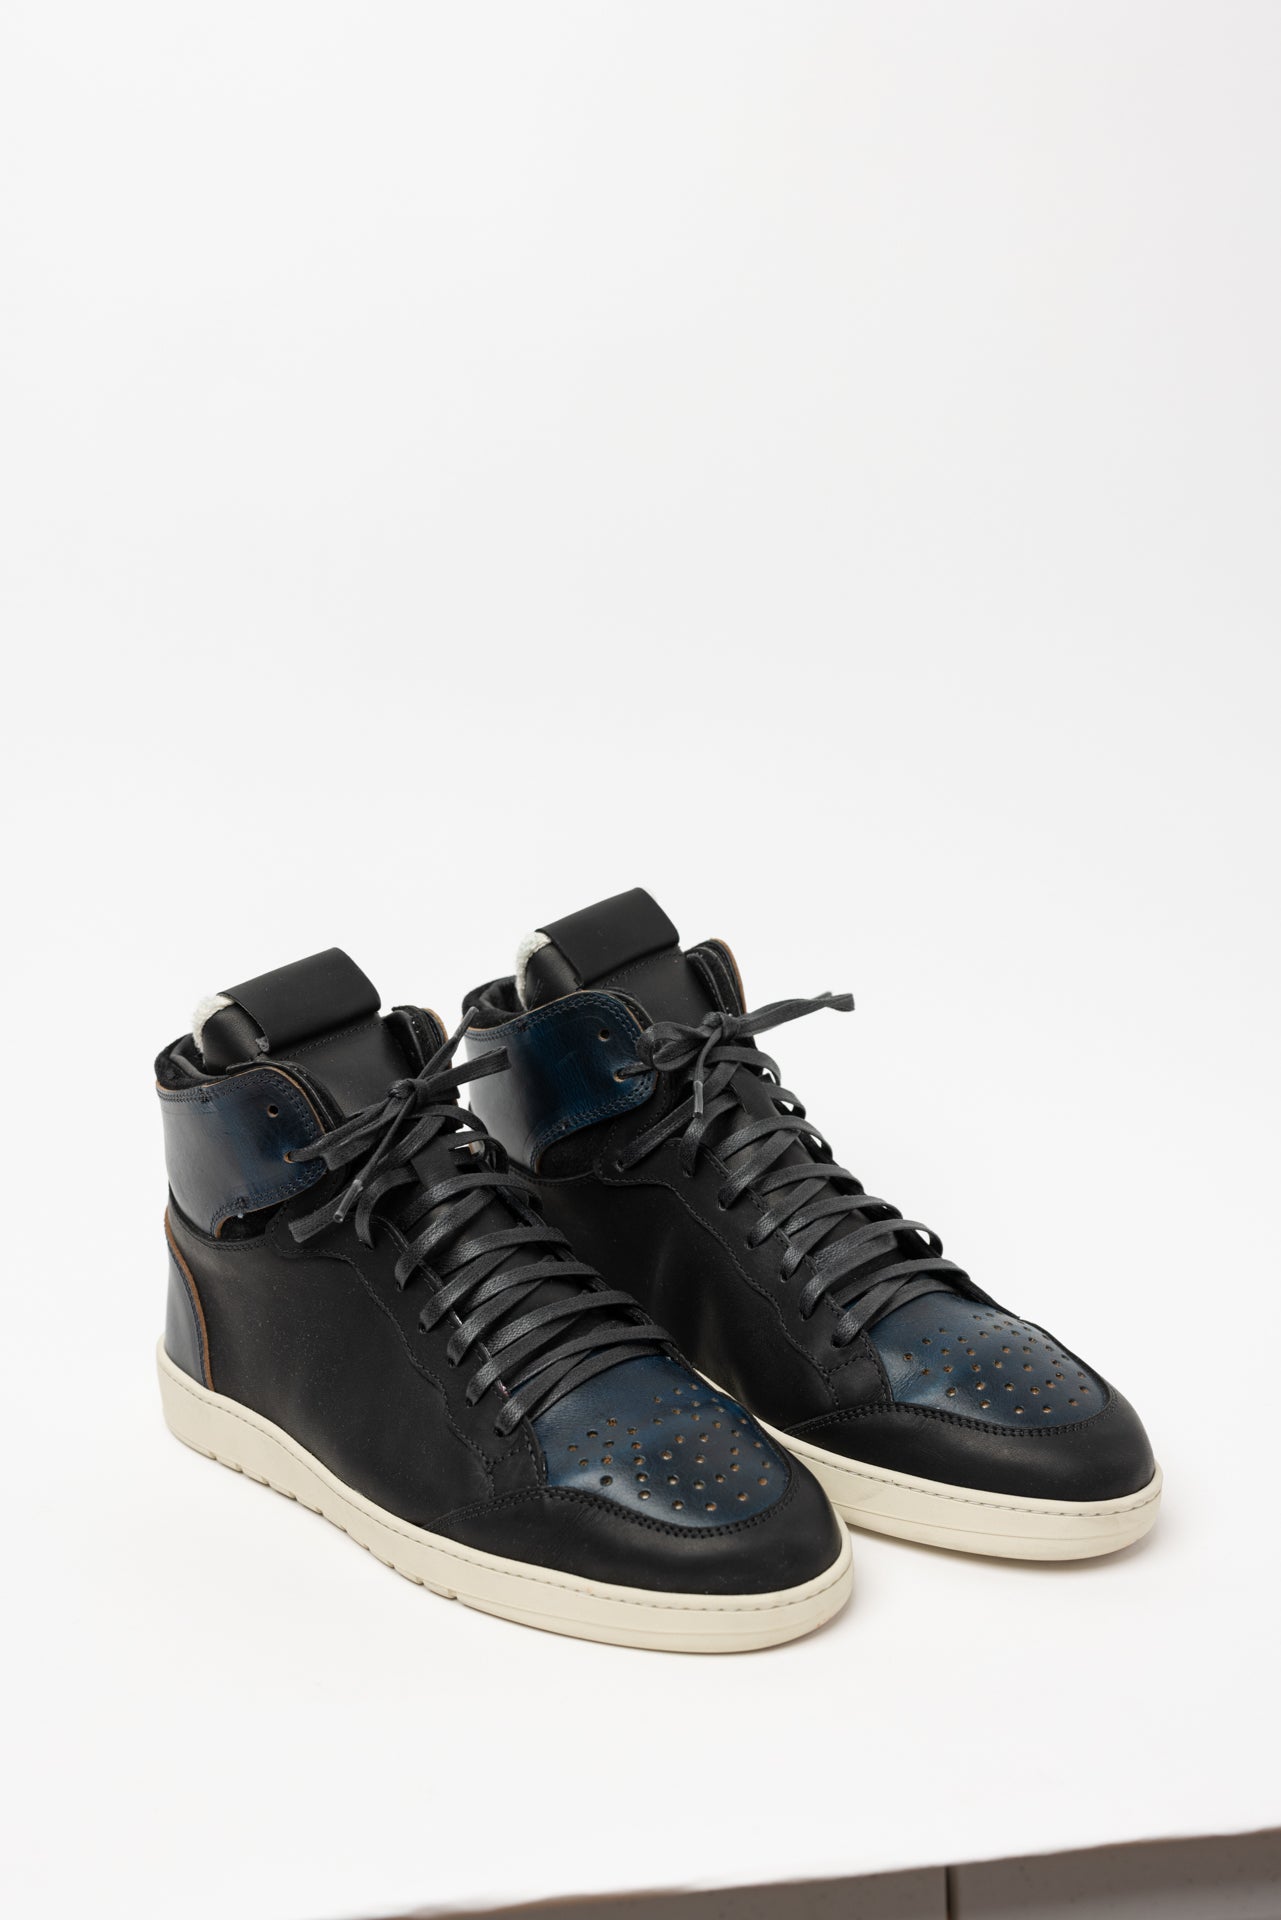 angle: Black Horween/Navy Chromexcel  black high top basketball shoes with black and blue leather